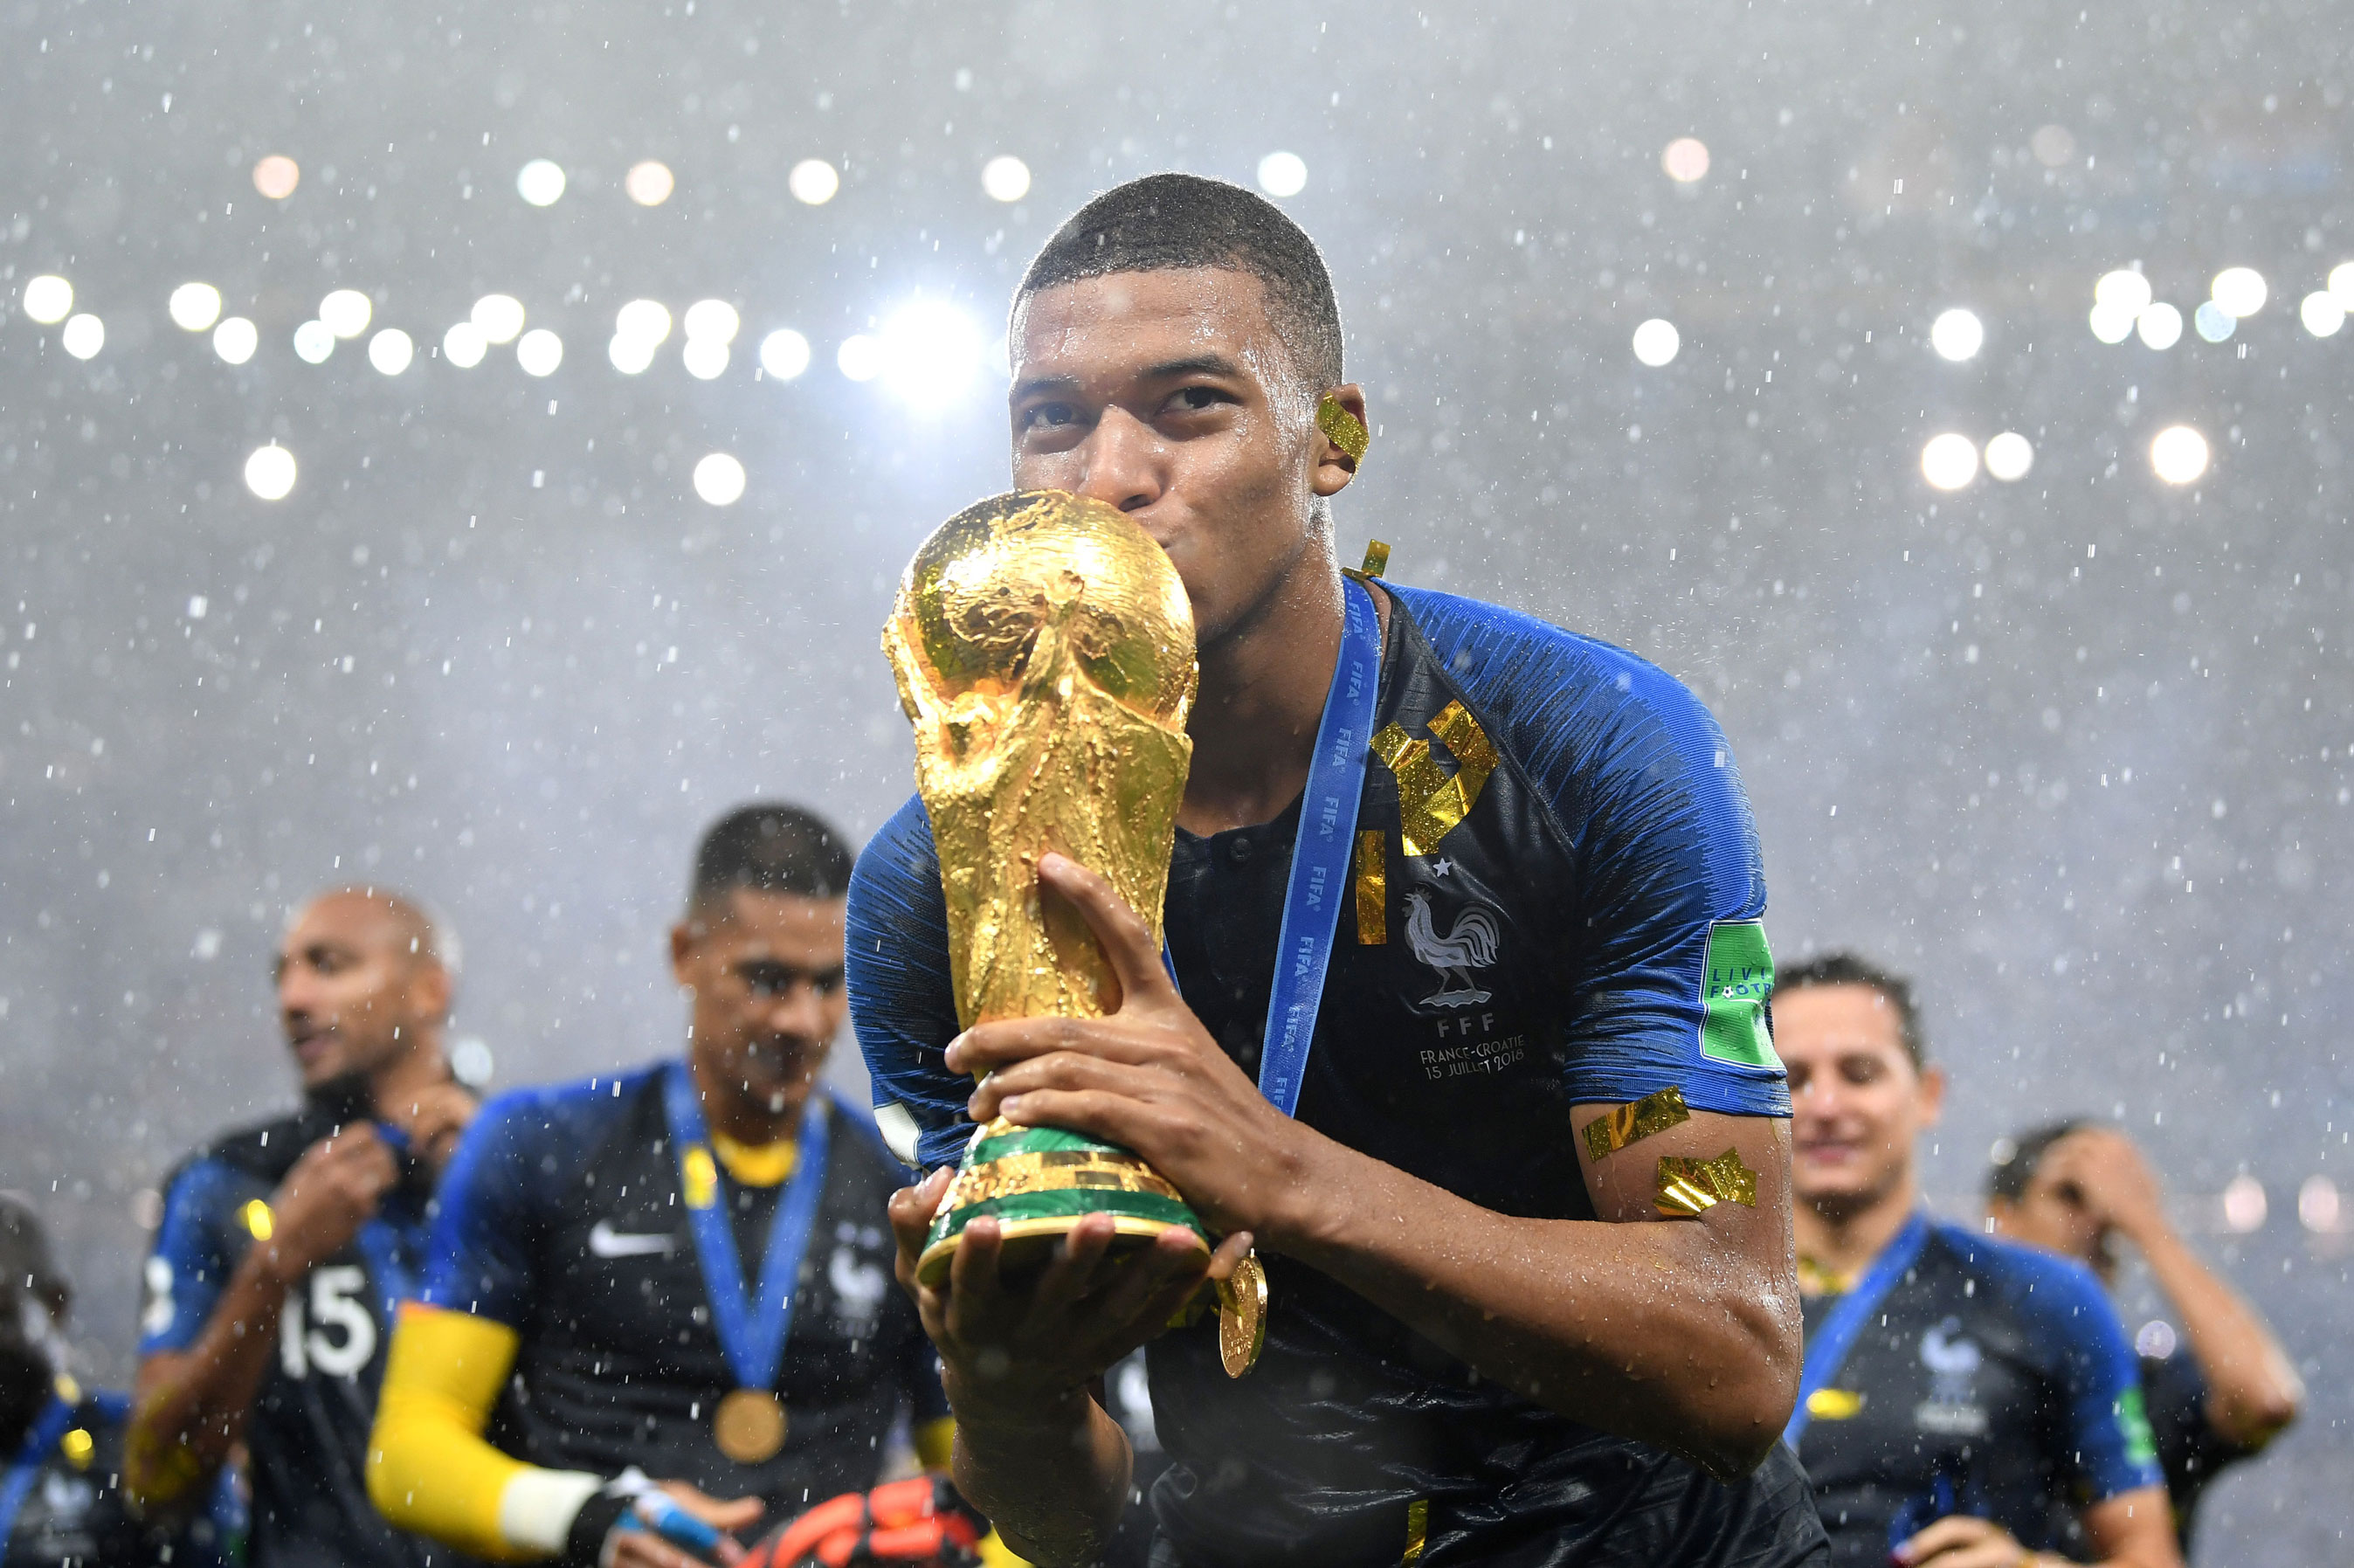 Kylian Mbappé is hungry for more World Cup success in Qatar - CNN Video